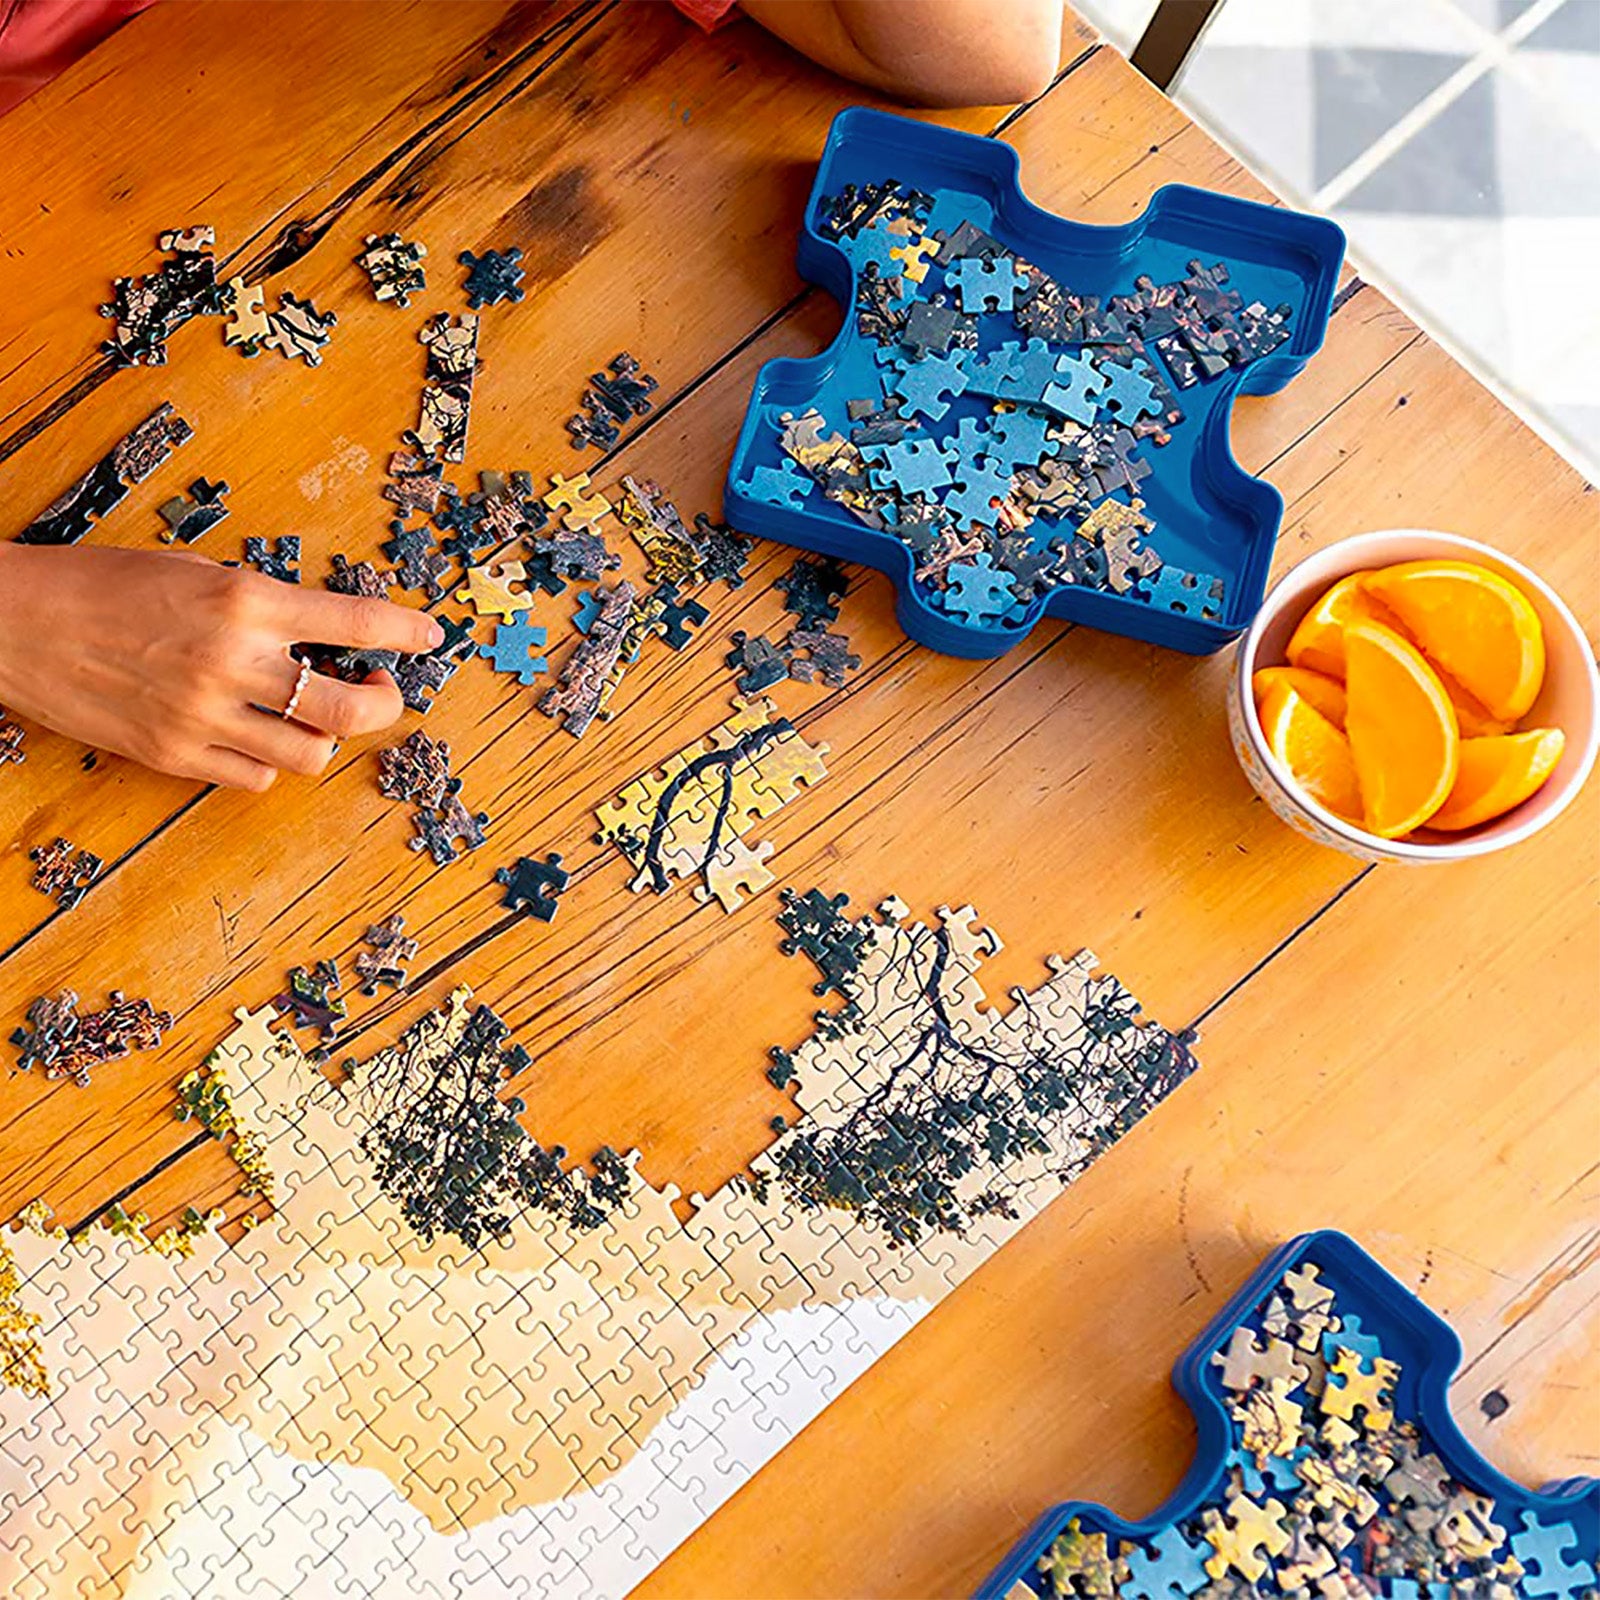 How can you safely store a puzzle in progress when you need to free up table space and don’t want nosy cats or children ruining your work? We recommend jigsaw puzzle sorters.